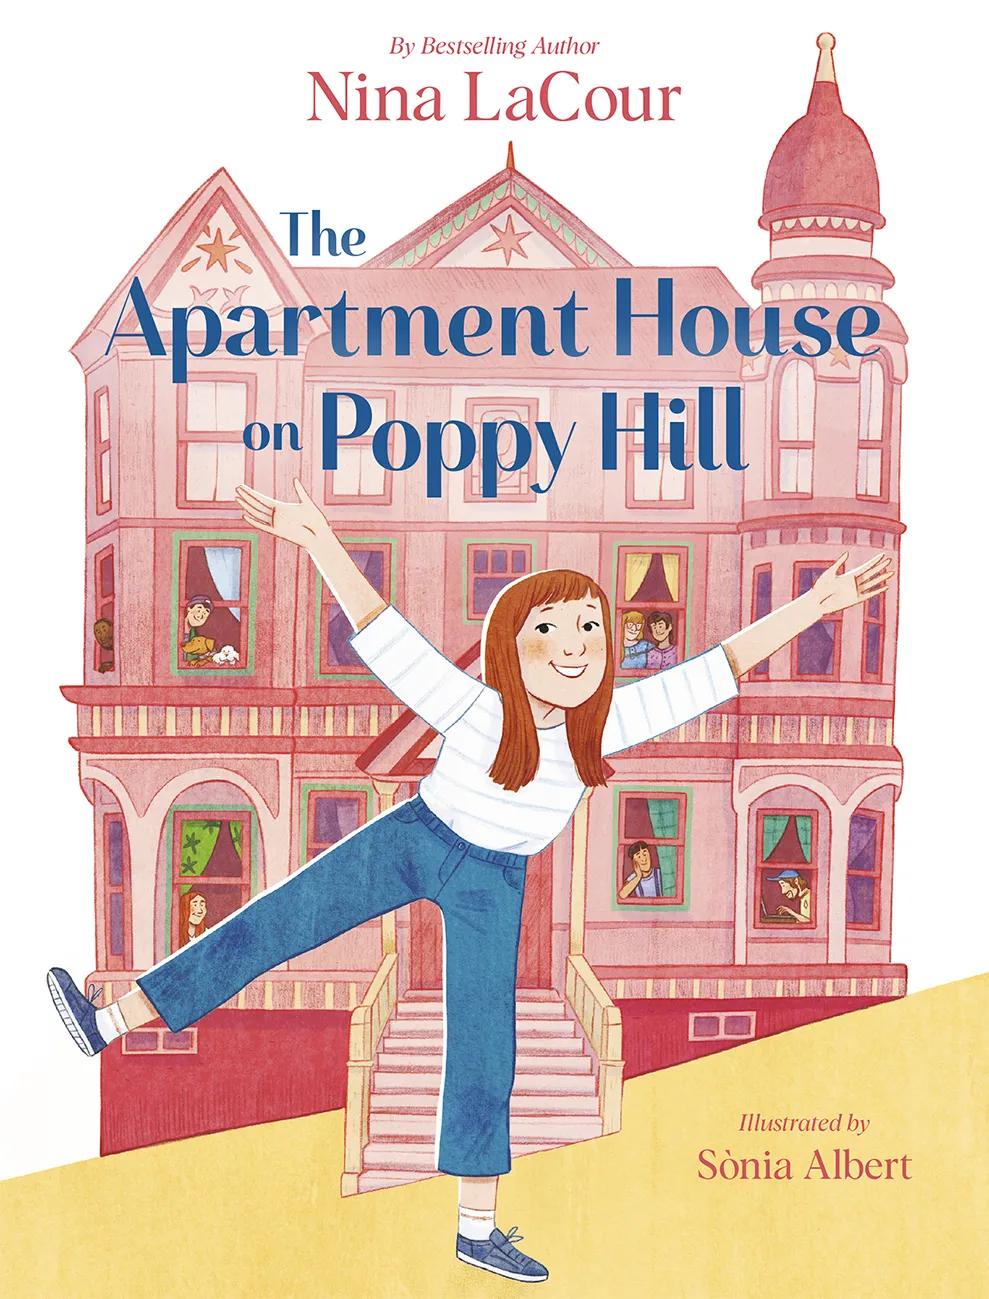 The Apartment House on Poppy Hill (The Apartment House on Poppy Hill #1)